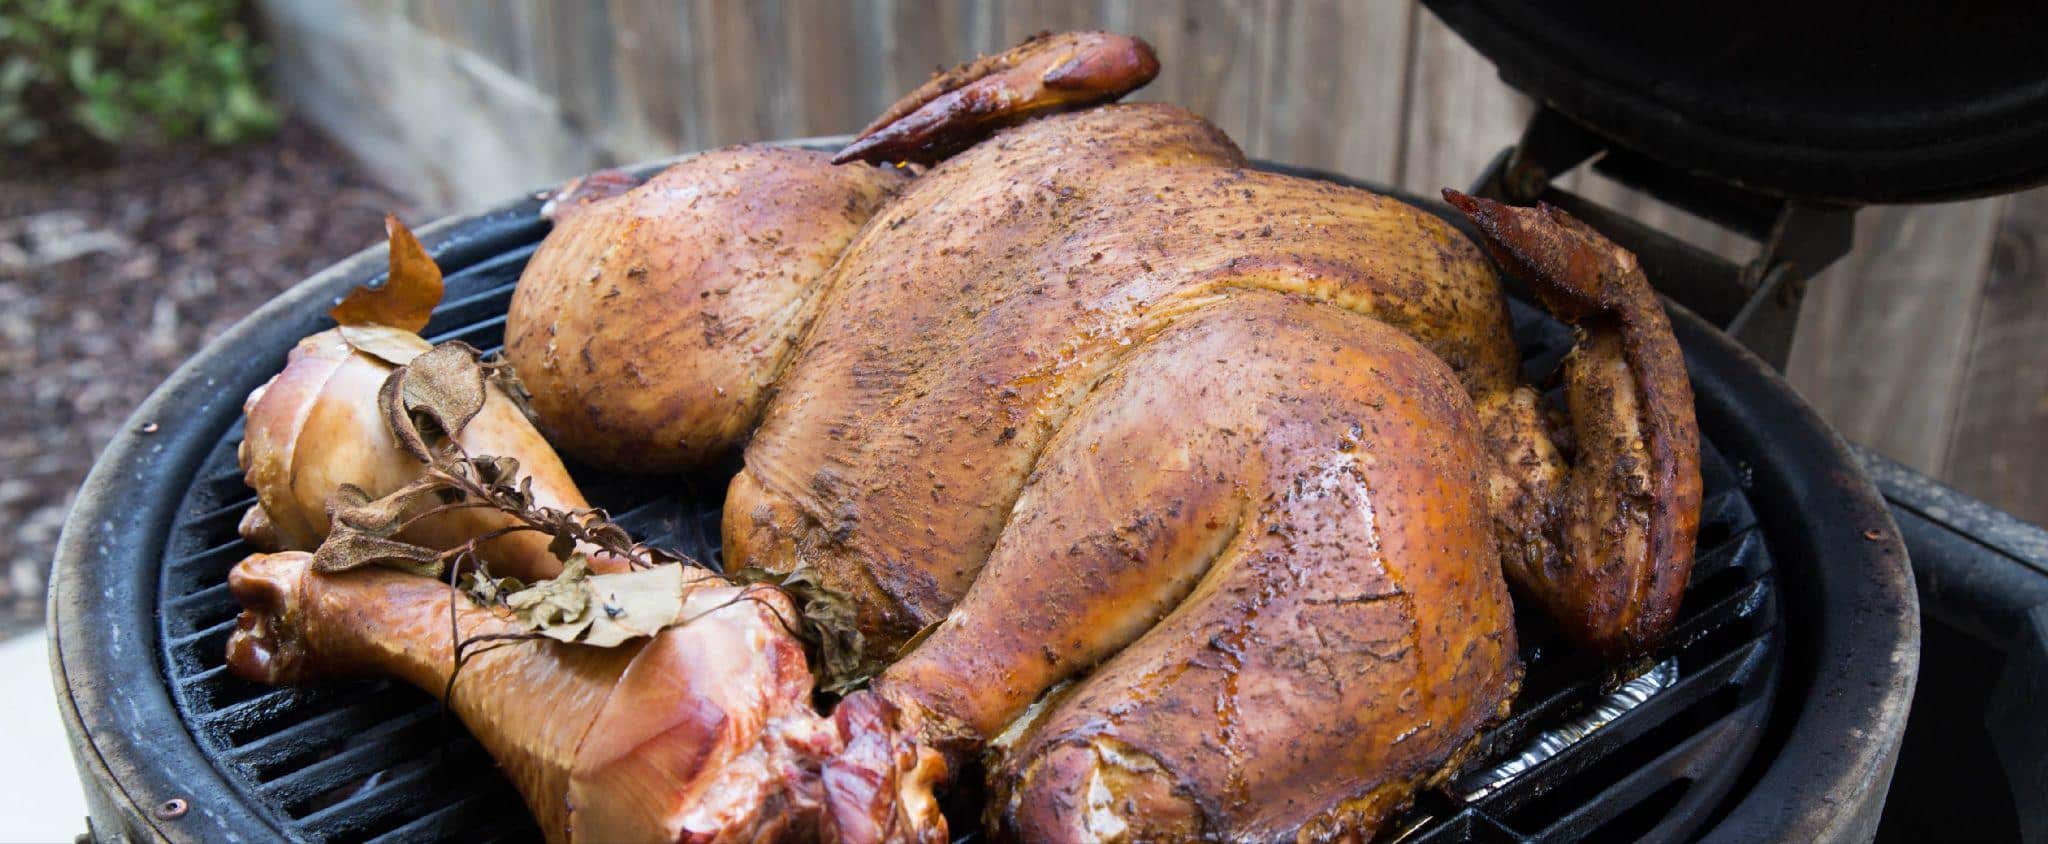 How to Grill Turkey